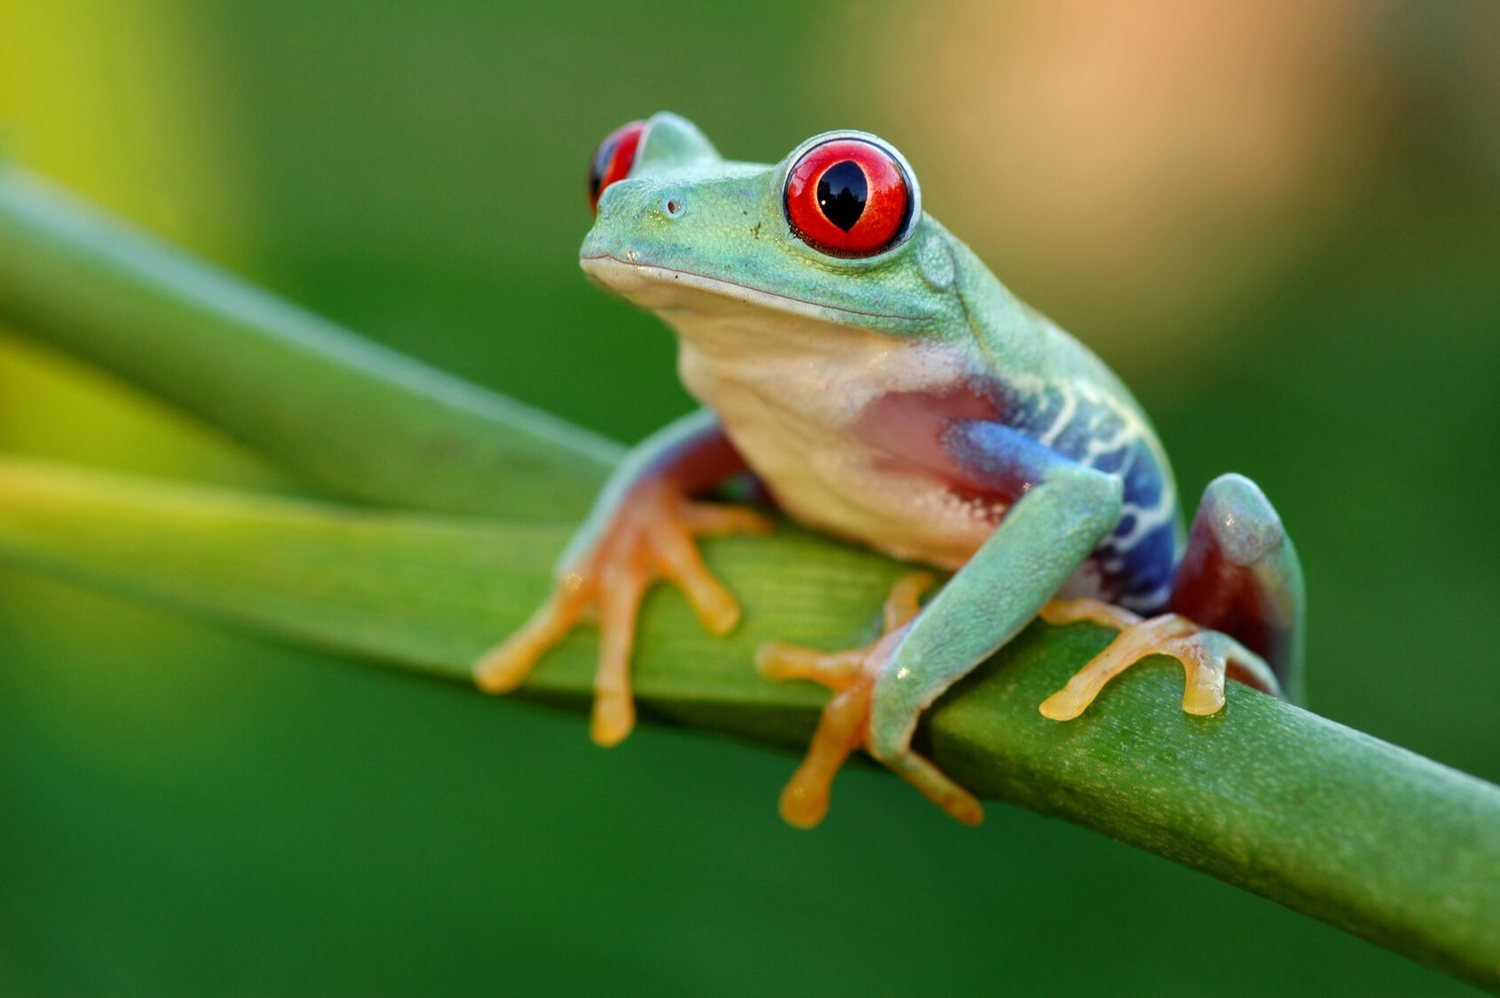 This Animal Quiz Might Not Be Hardest 1 You've Ever Taken, But It Certainly Isn't Easy Javan tree frogs amphibians